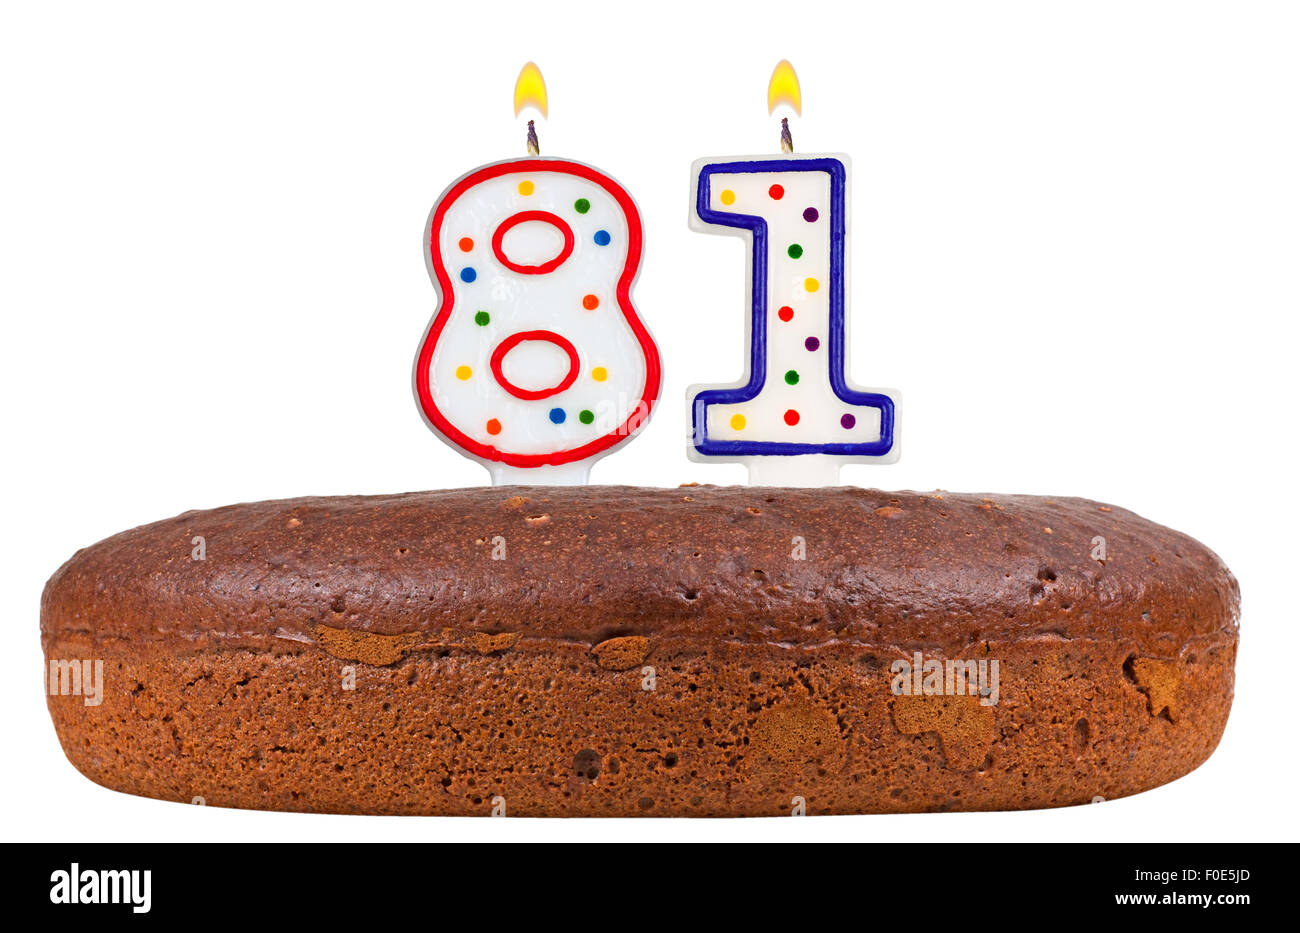 birthday cake with candles number eighty one Stock Photo